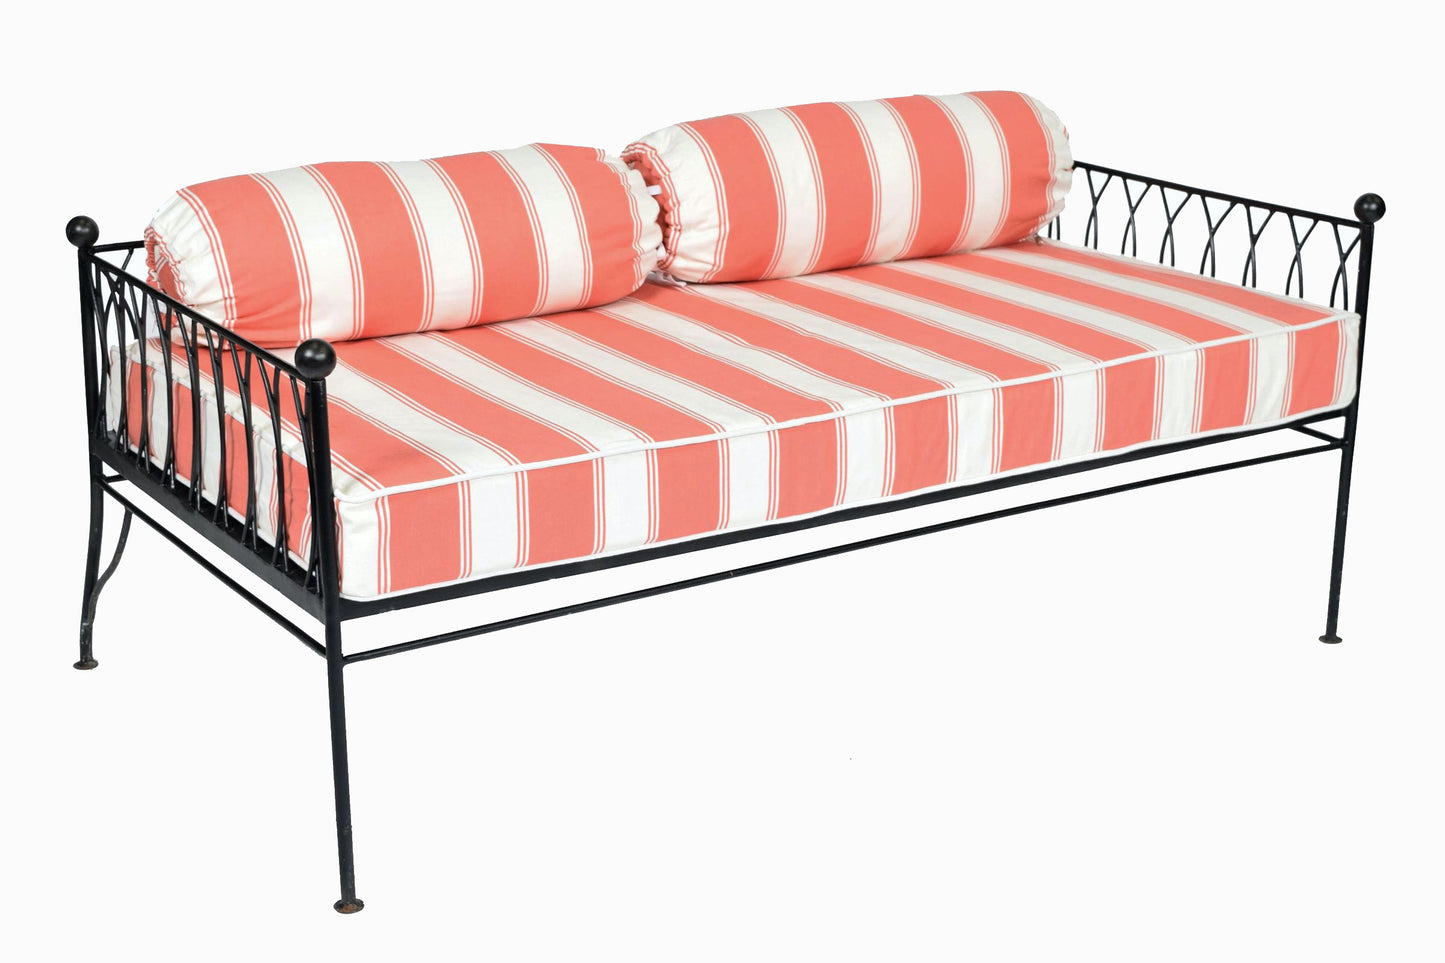 PALM SPRINGS GUNMETAL DAYBED, coral and cream stripe fabric